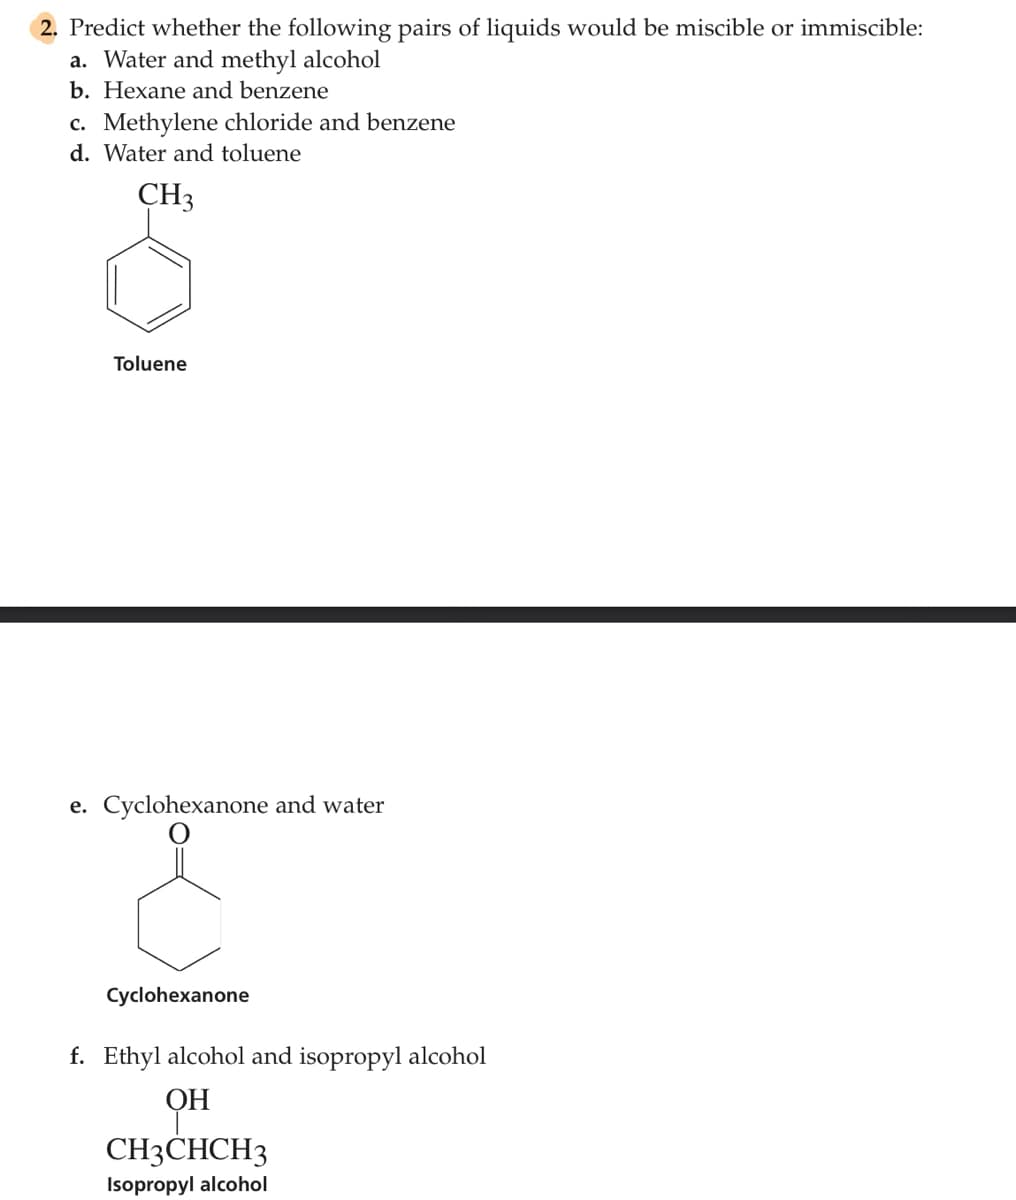 2. Predict whether the following pairs of liquids would be miscible or immiscible:
a. Water and methyl alcohol
b. Hexane and benzene
c. Methylene chloride and benzene
d. Water and toluene
CH3
Toluene
e. Cyclohexanone and water
Cyclohexanone
f. Ethyl alcohol and isopropyl alcohol
ОН
CH3CHCH3
Isopropyl alcohol
